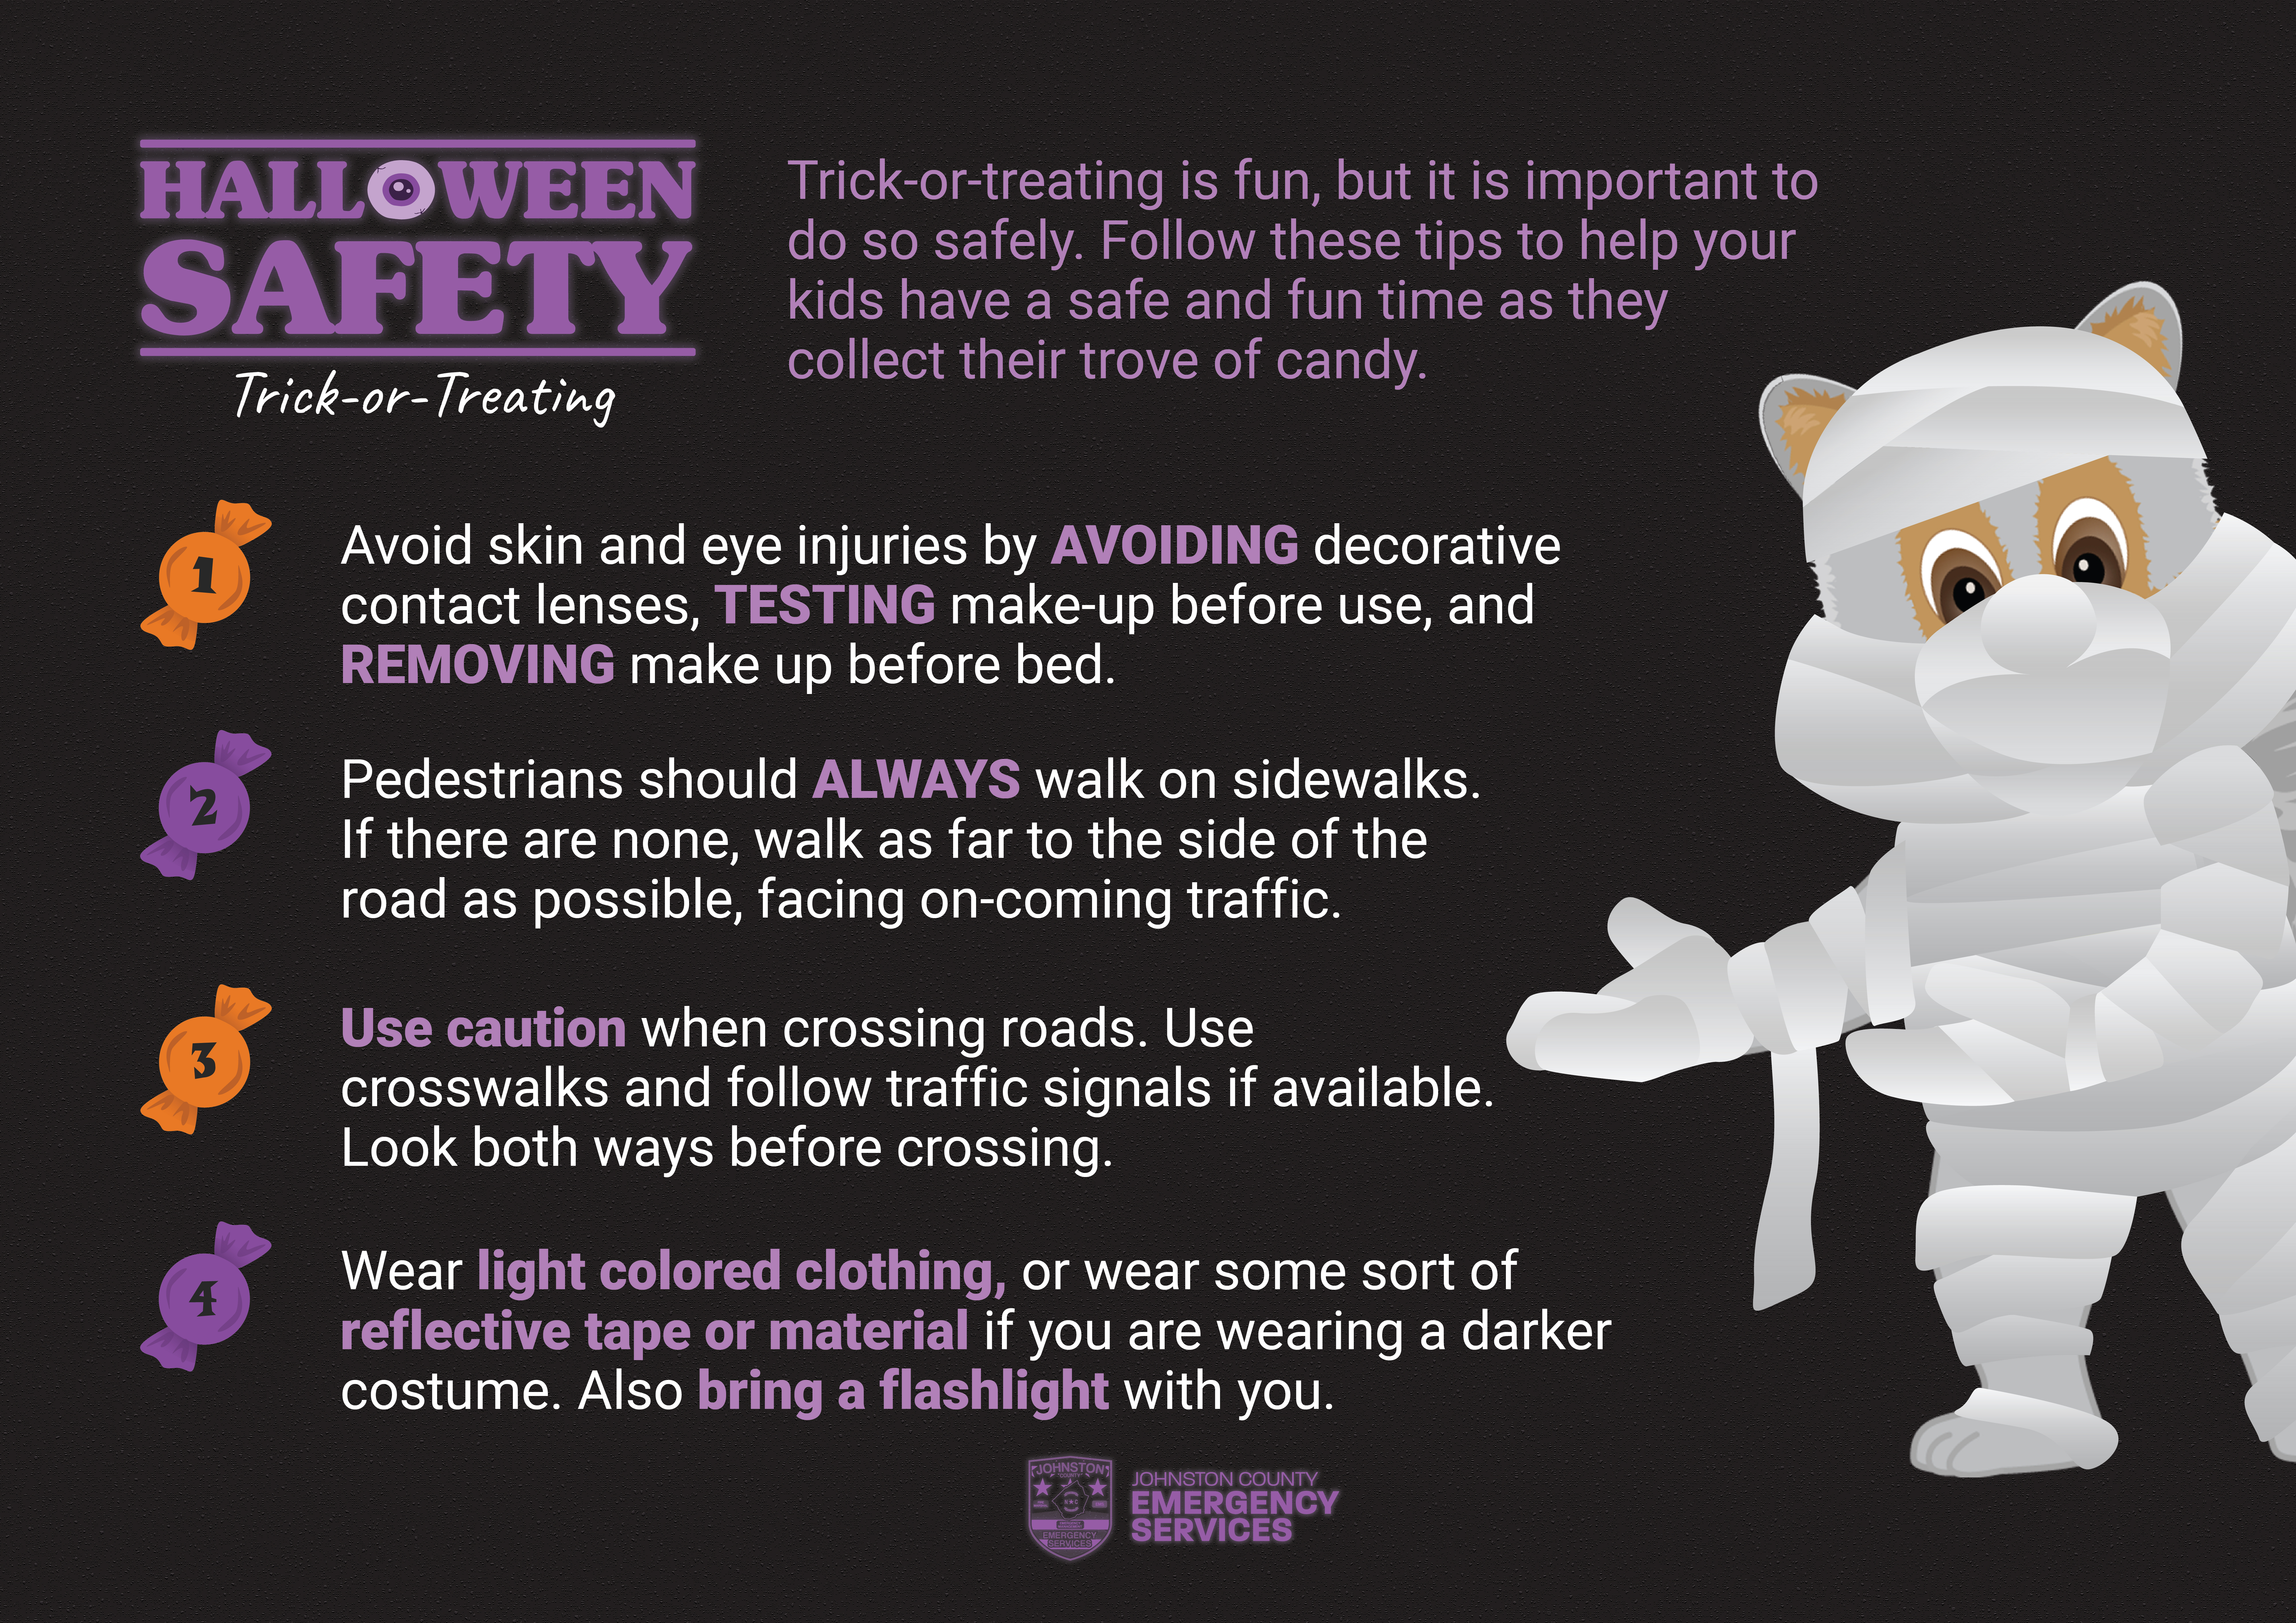 Halloween Safety | Trick-or-Treating